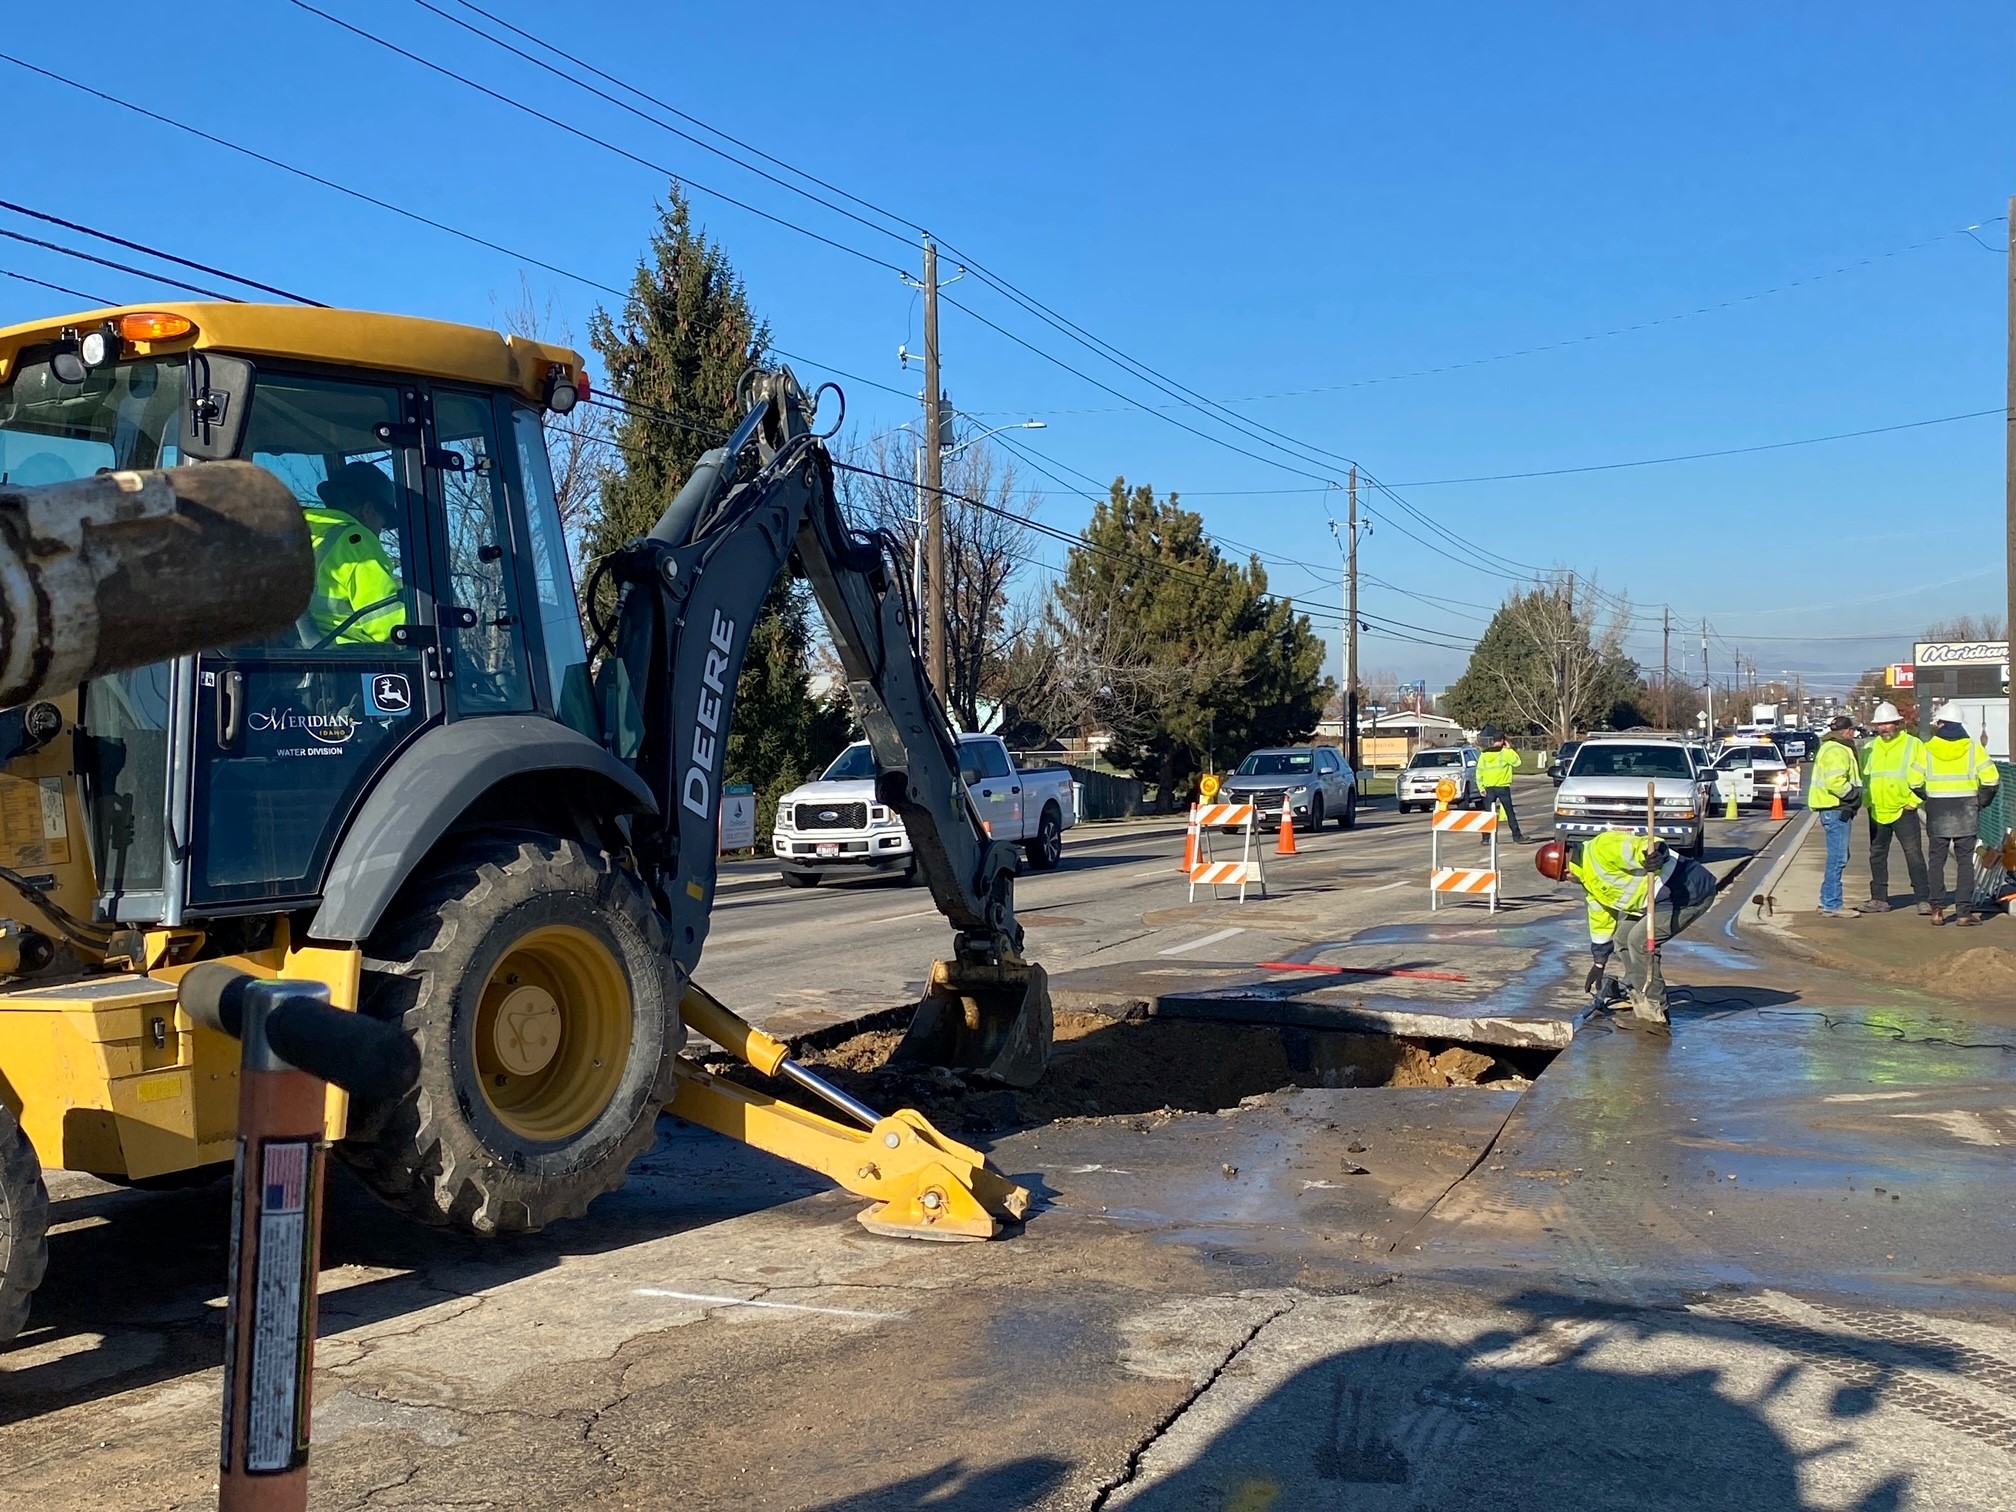 Crews working on the water main break on Meridian Road south of Franklin